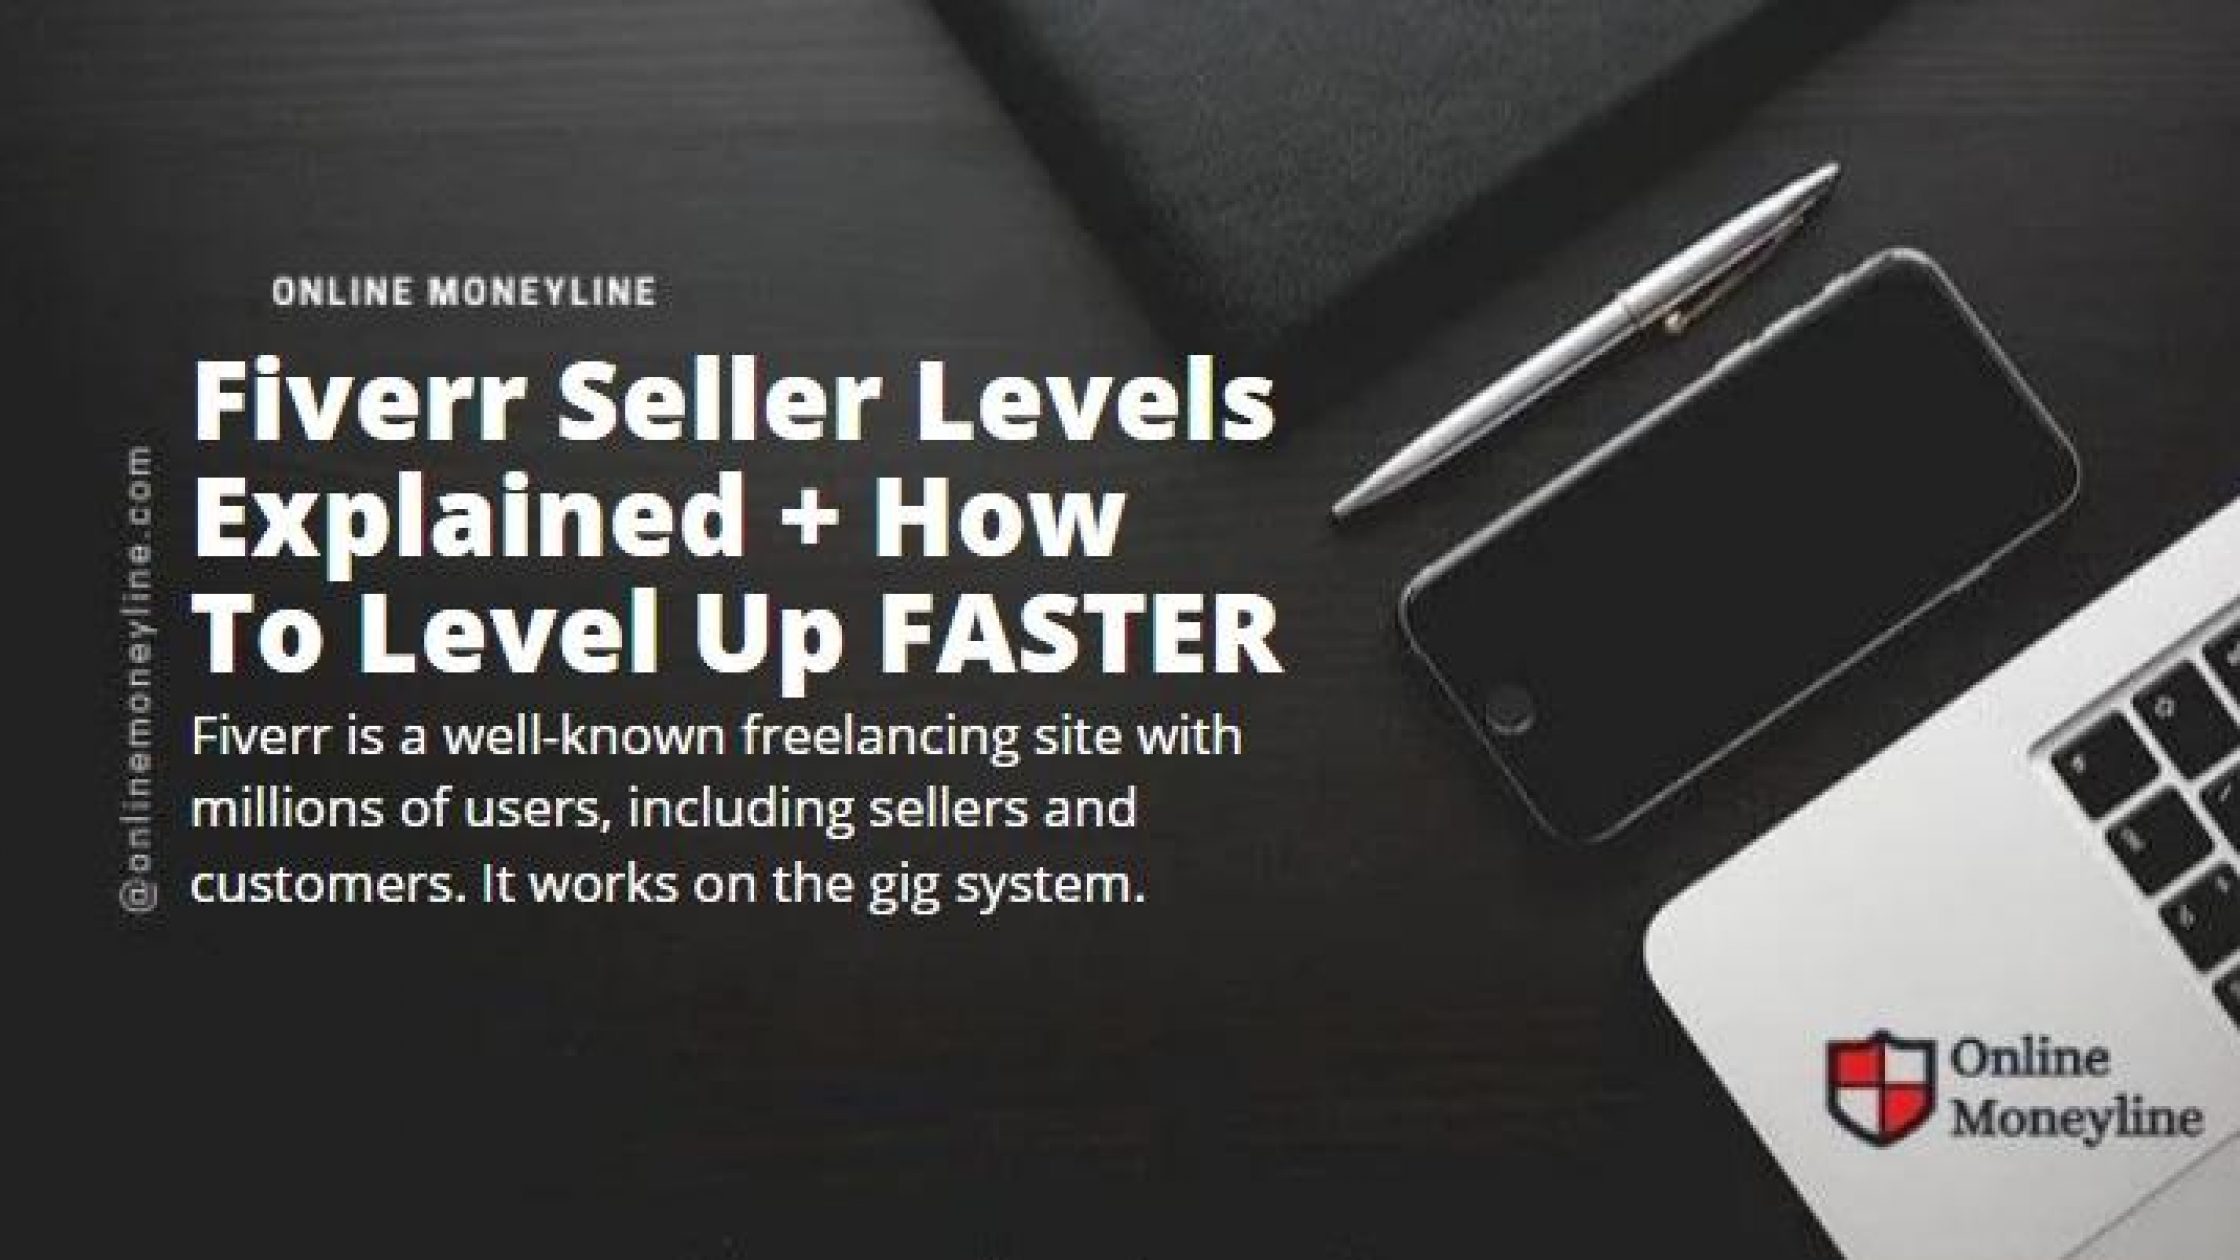 Fiverr Seller Levels Explained + How To Level Up FASTER